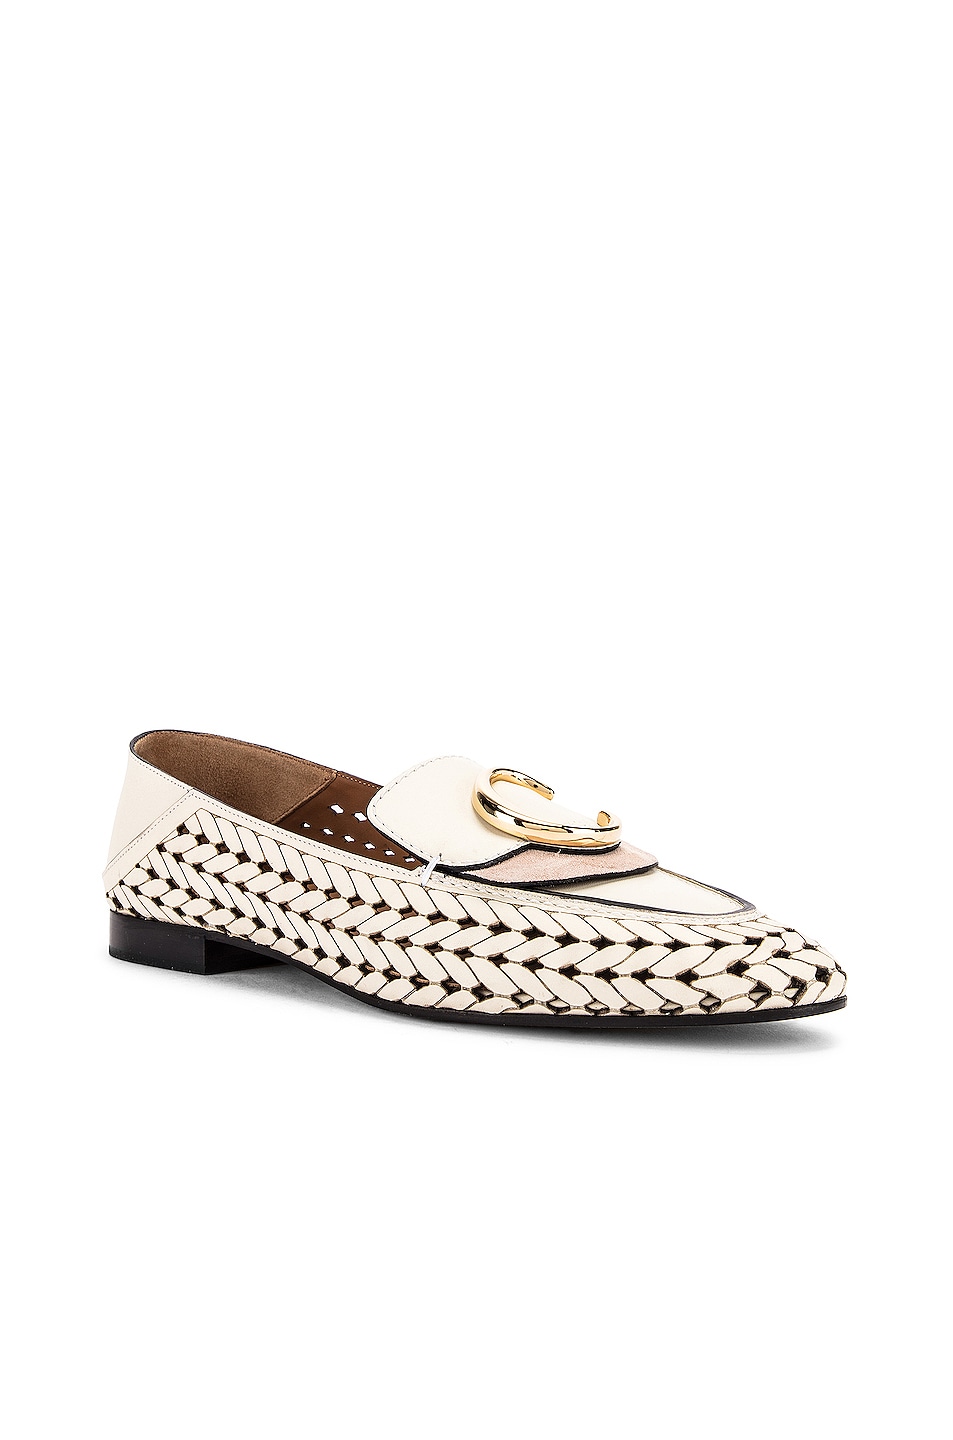 Chloe C Lasered Leather Loafers in White | FWRD